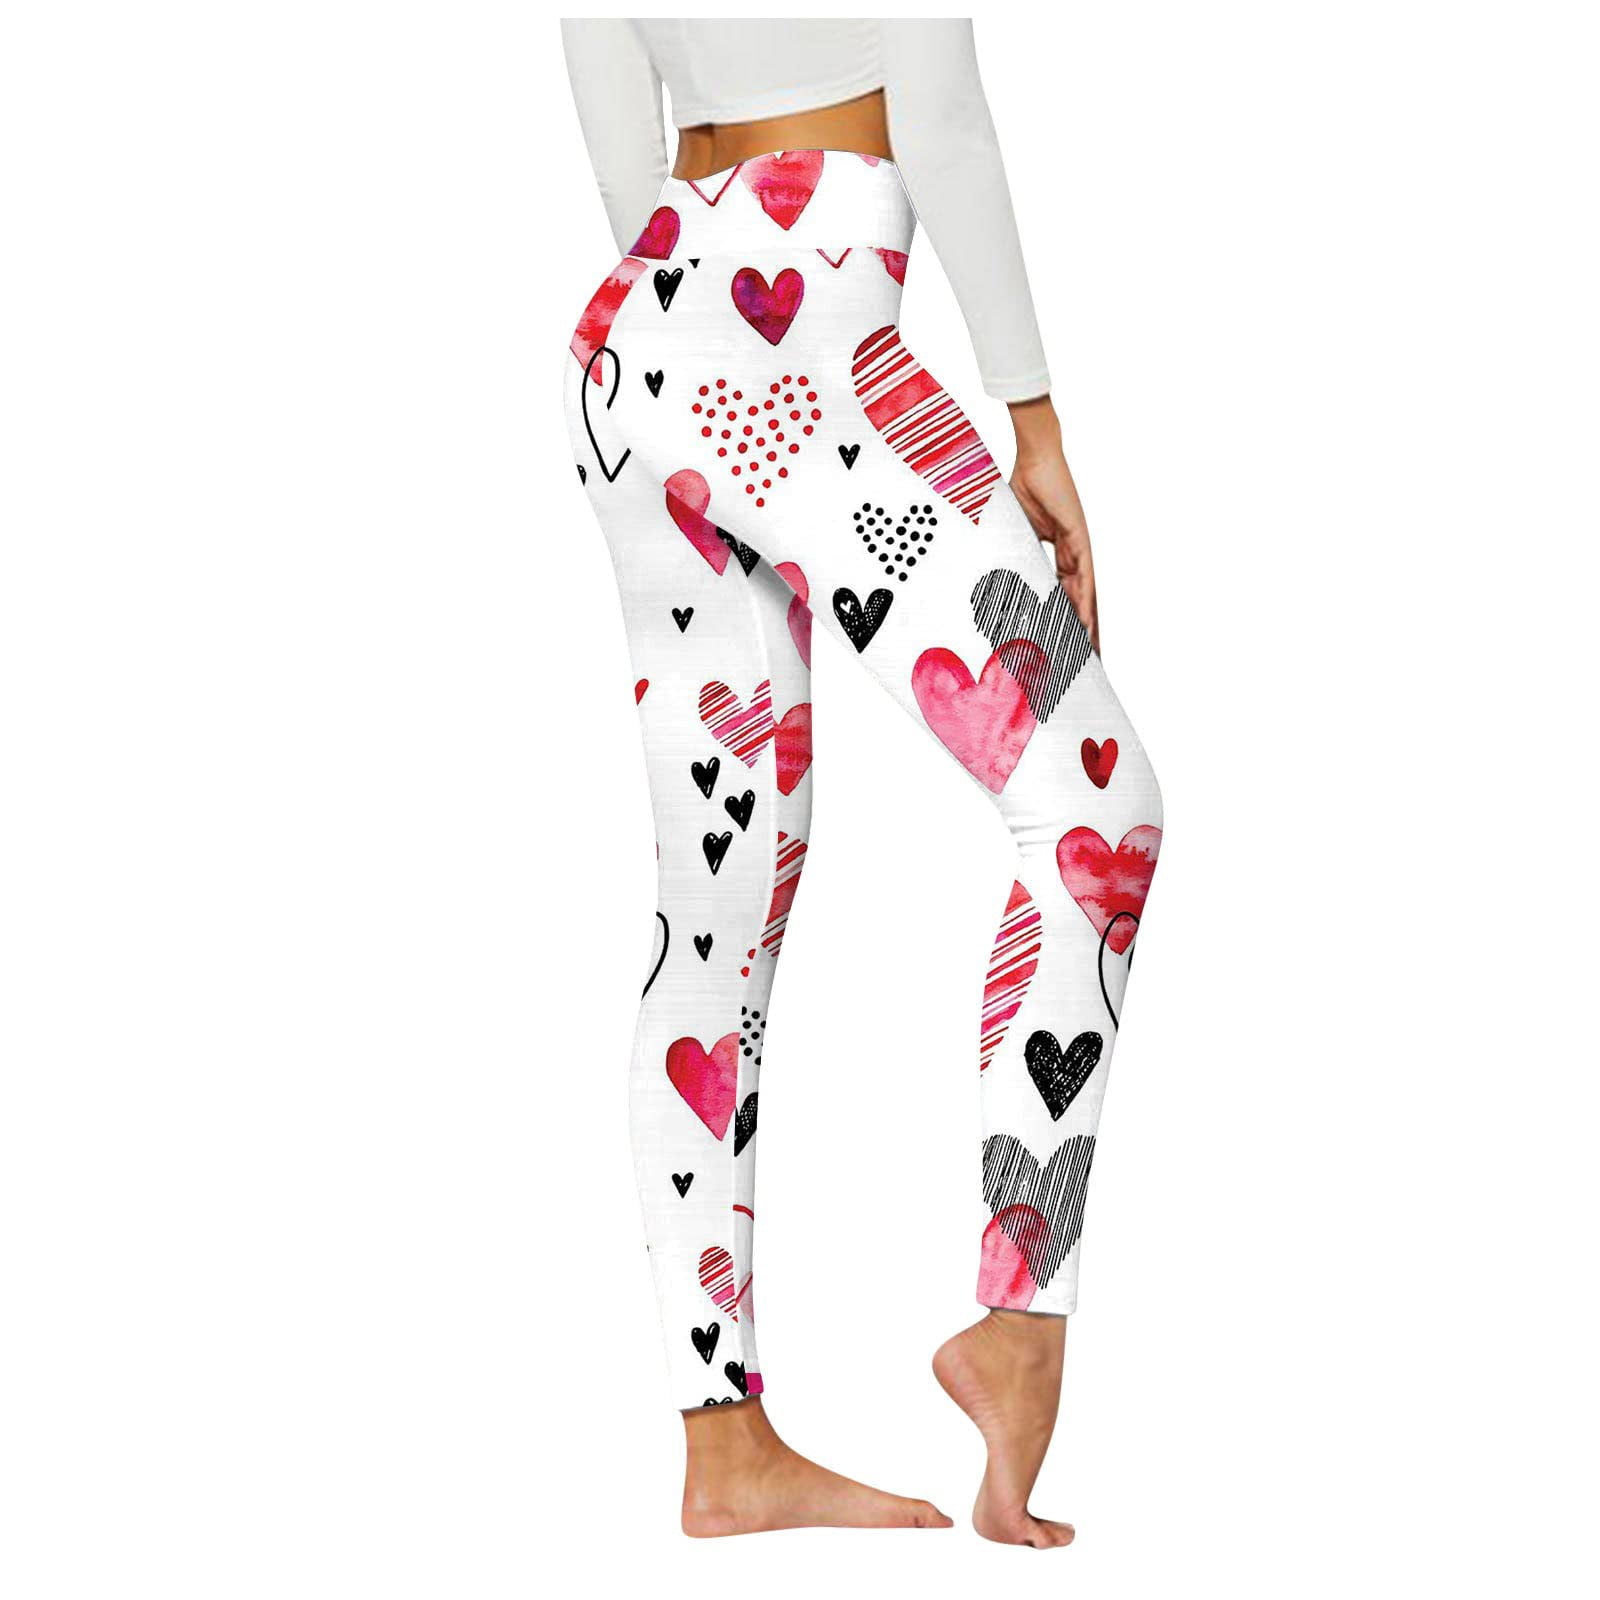 Rvidbe Valentines Day Leggings for Women, Womens High Waist Valentine's Day  Print Yoga Leggings Butt Lifting Athletic PantsValentines Day Tights for  Women Pink 